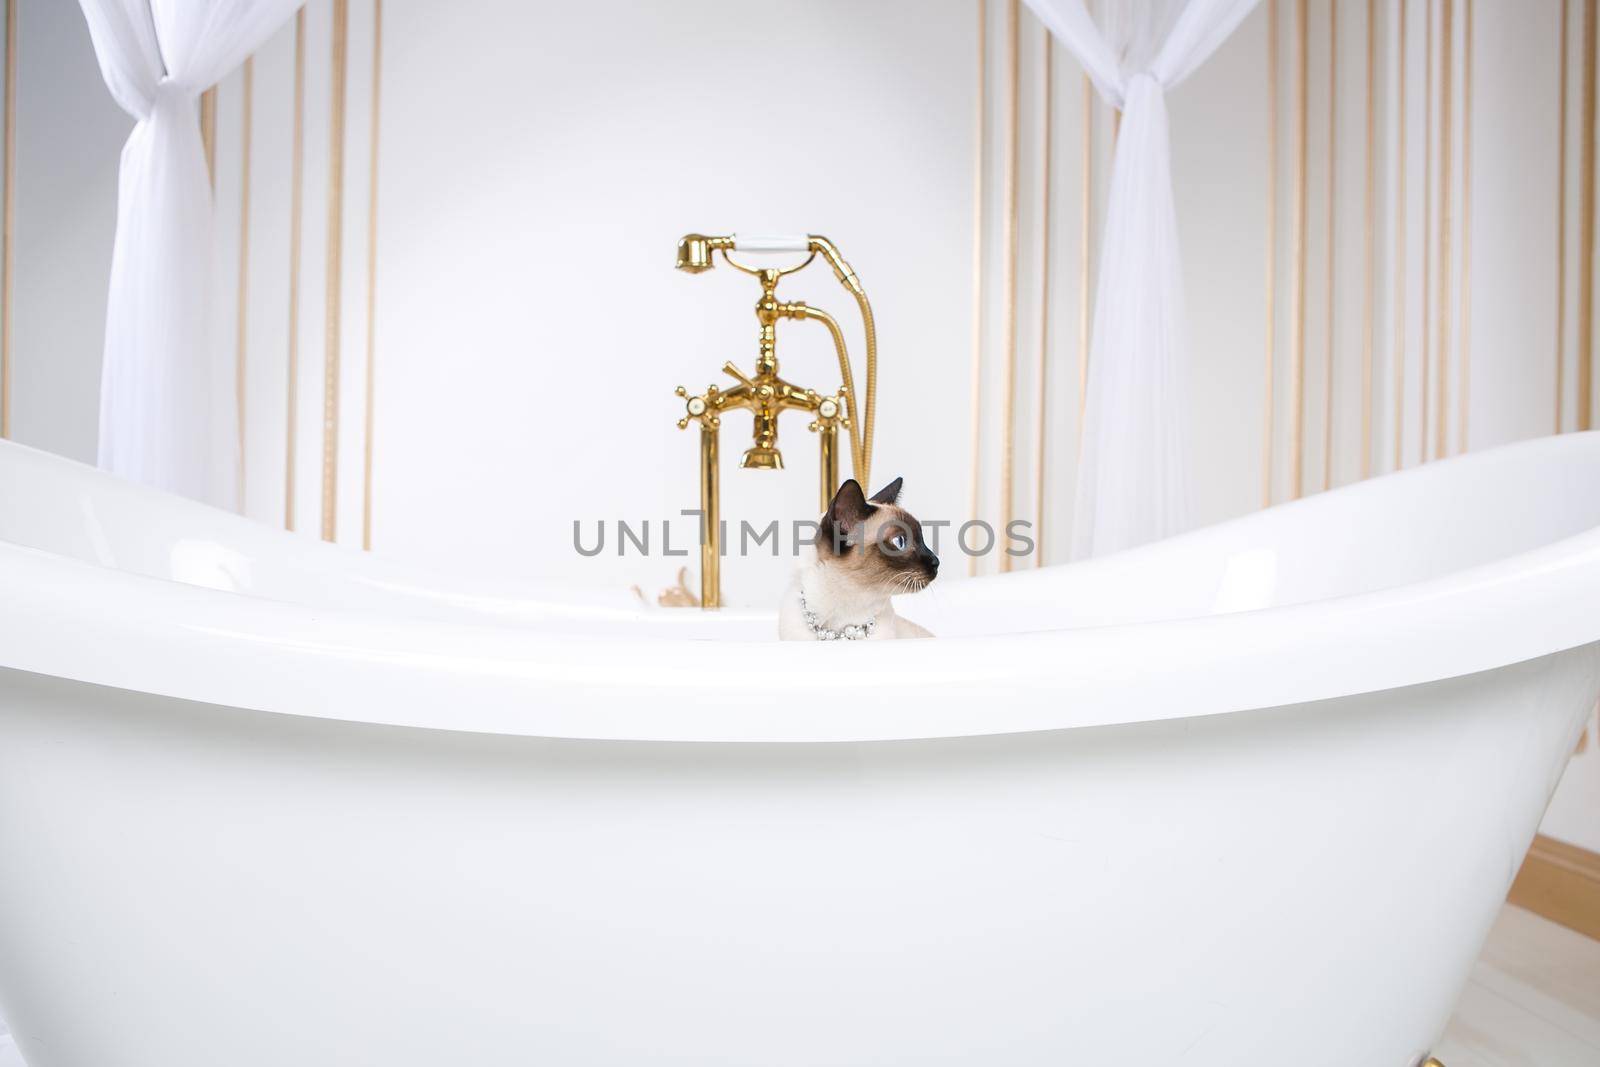 The theme is luxury and wealth. A cat without a tail of the Mekong Bobtail breed in a retro bathroom in the interior of the Barocoo Versailles Palace. Jewel jewelery on the neck by Tomashevska